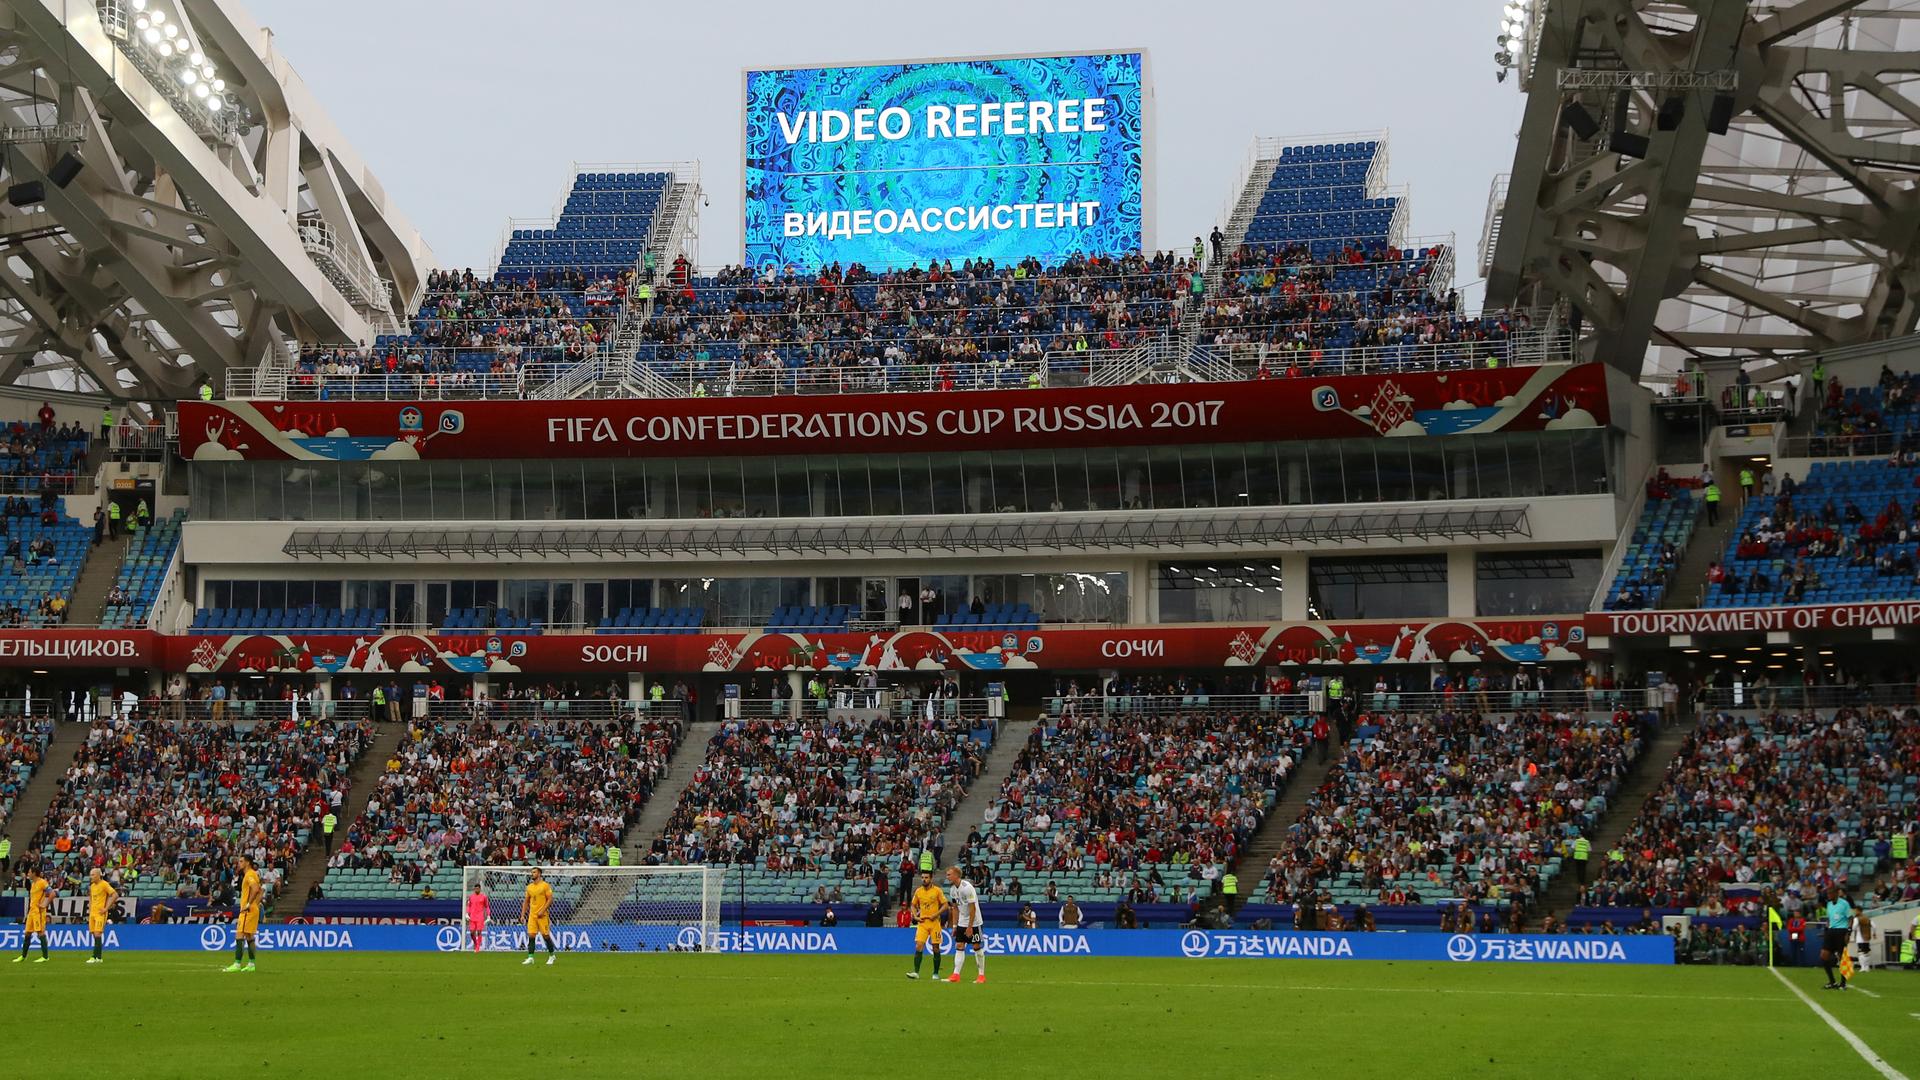 Players waiting for a decision after the referee asked for a video review of Australia's second goal against Germany during a Confederation Cup match in Sochi, Russia